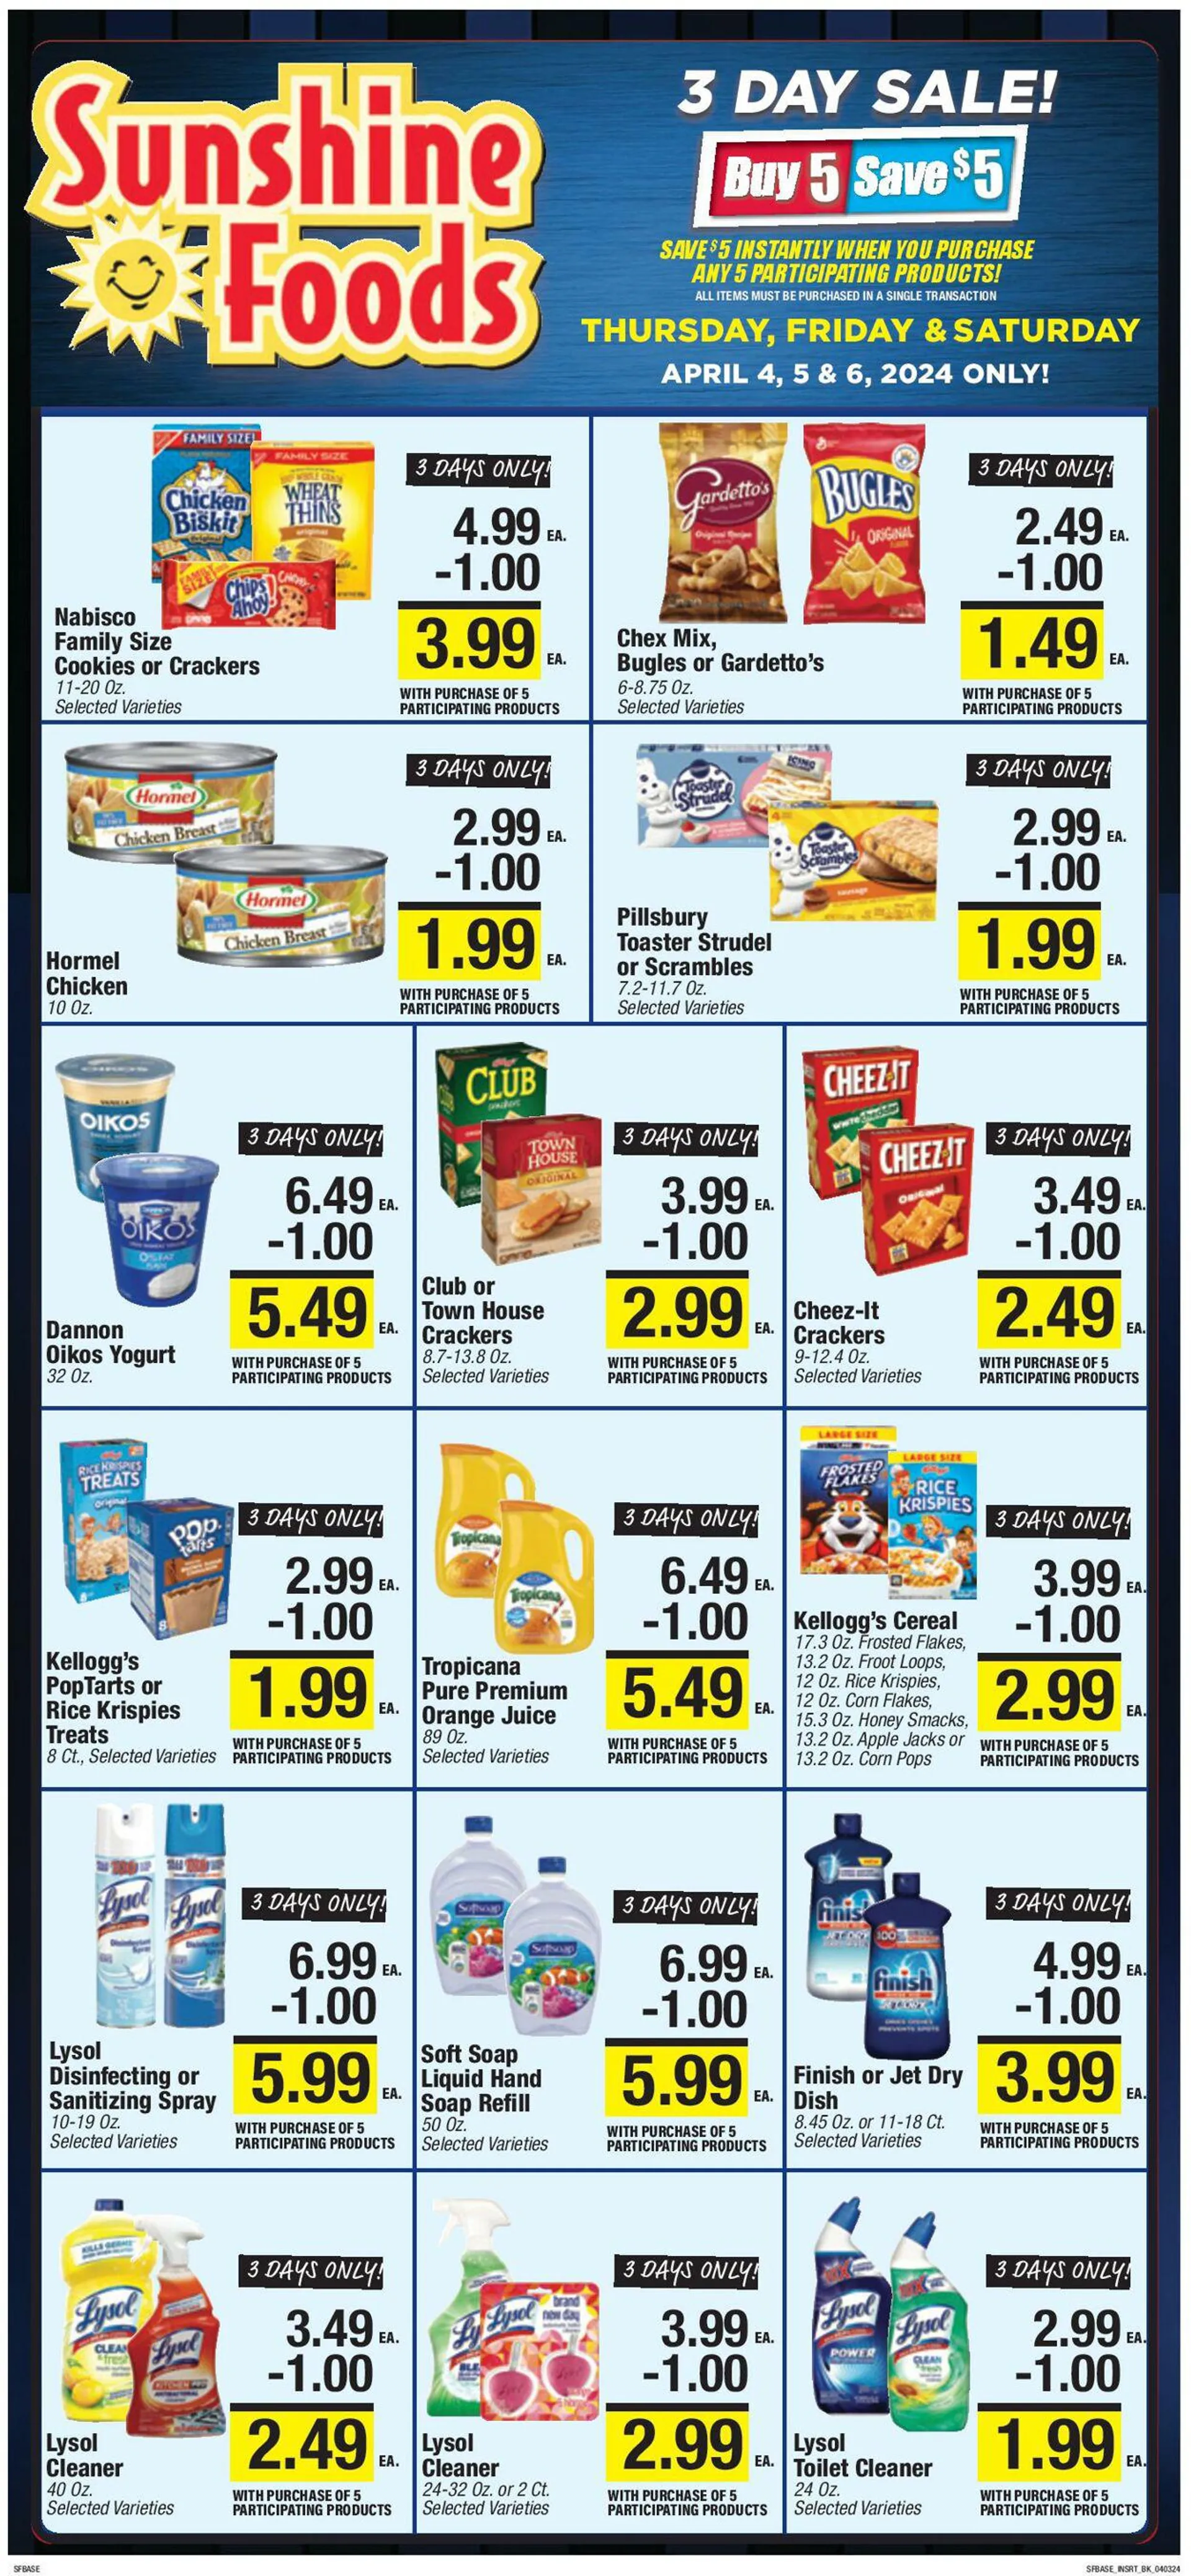 Weekly ad Sunshine Foods from April 3 to April 9 2024 - Page 10